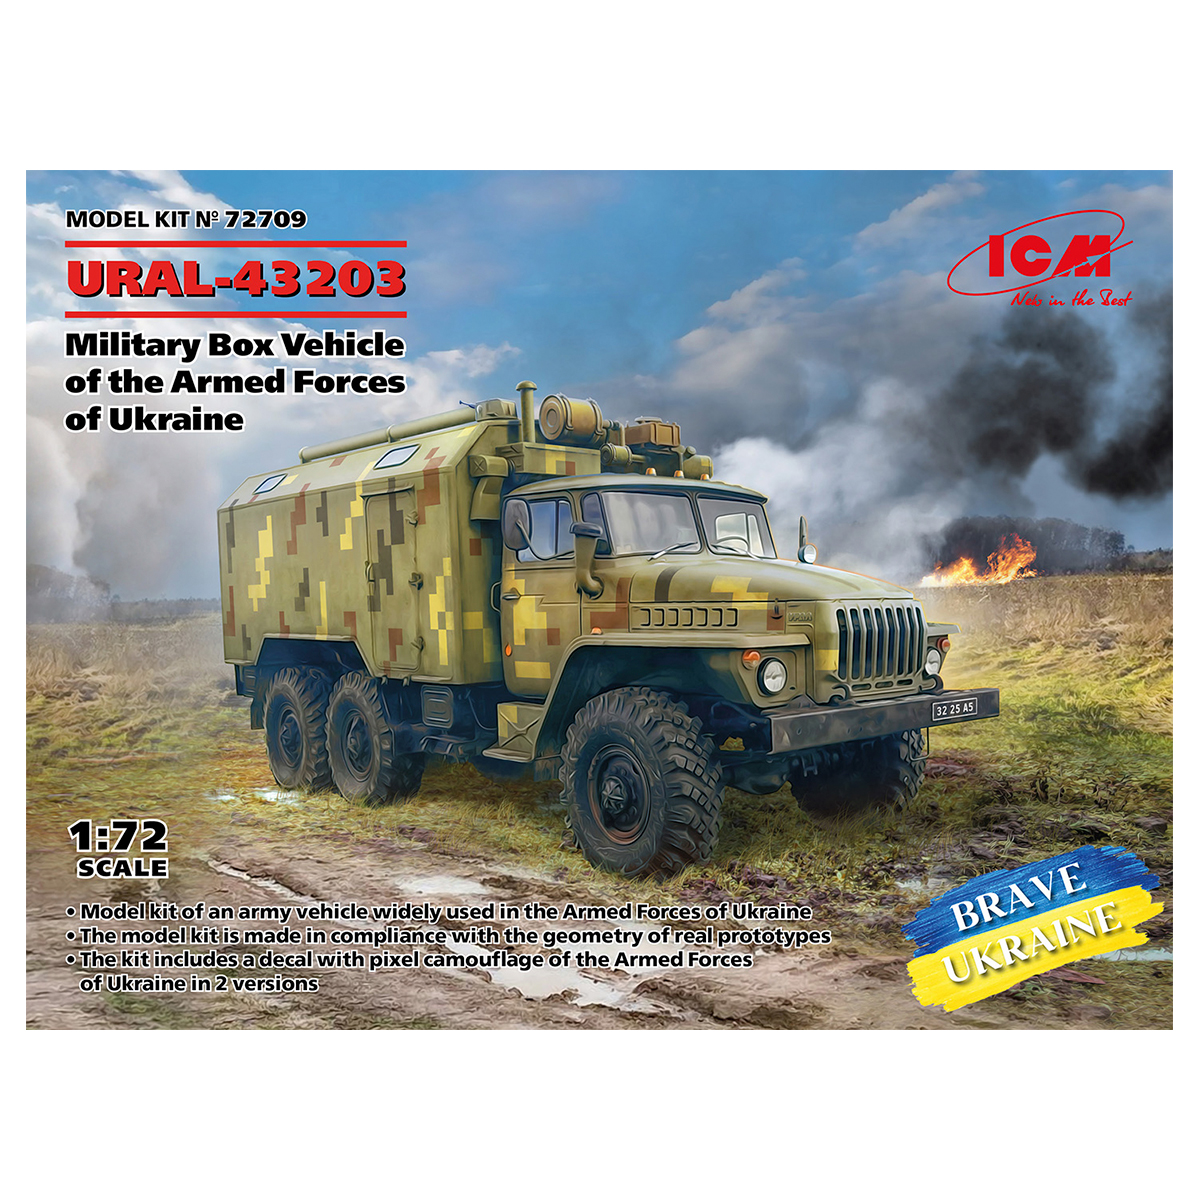 URAL-43203, Military Box Vehicle of the Armed Forces of Ukraine 1/72